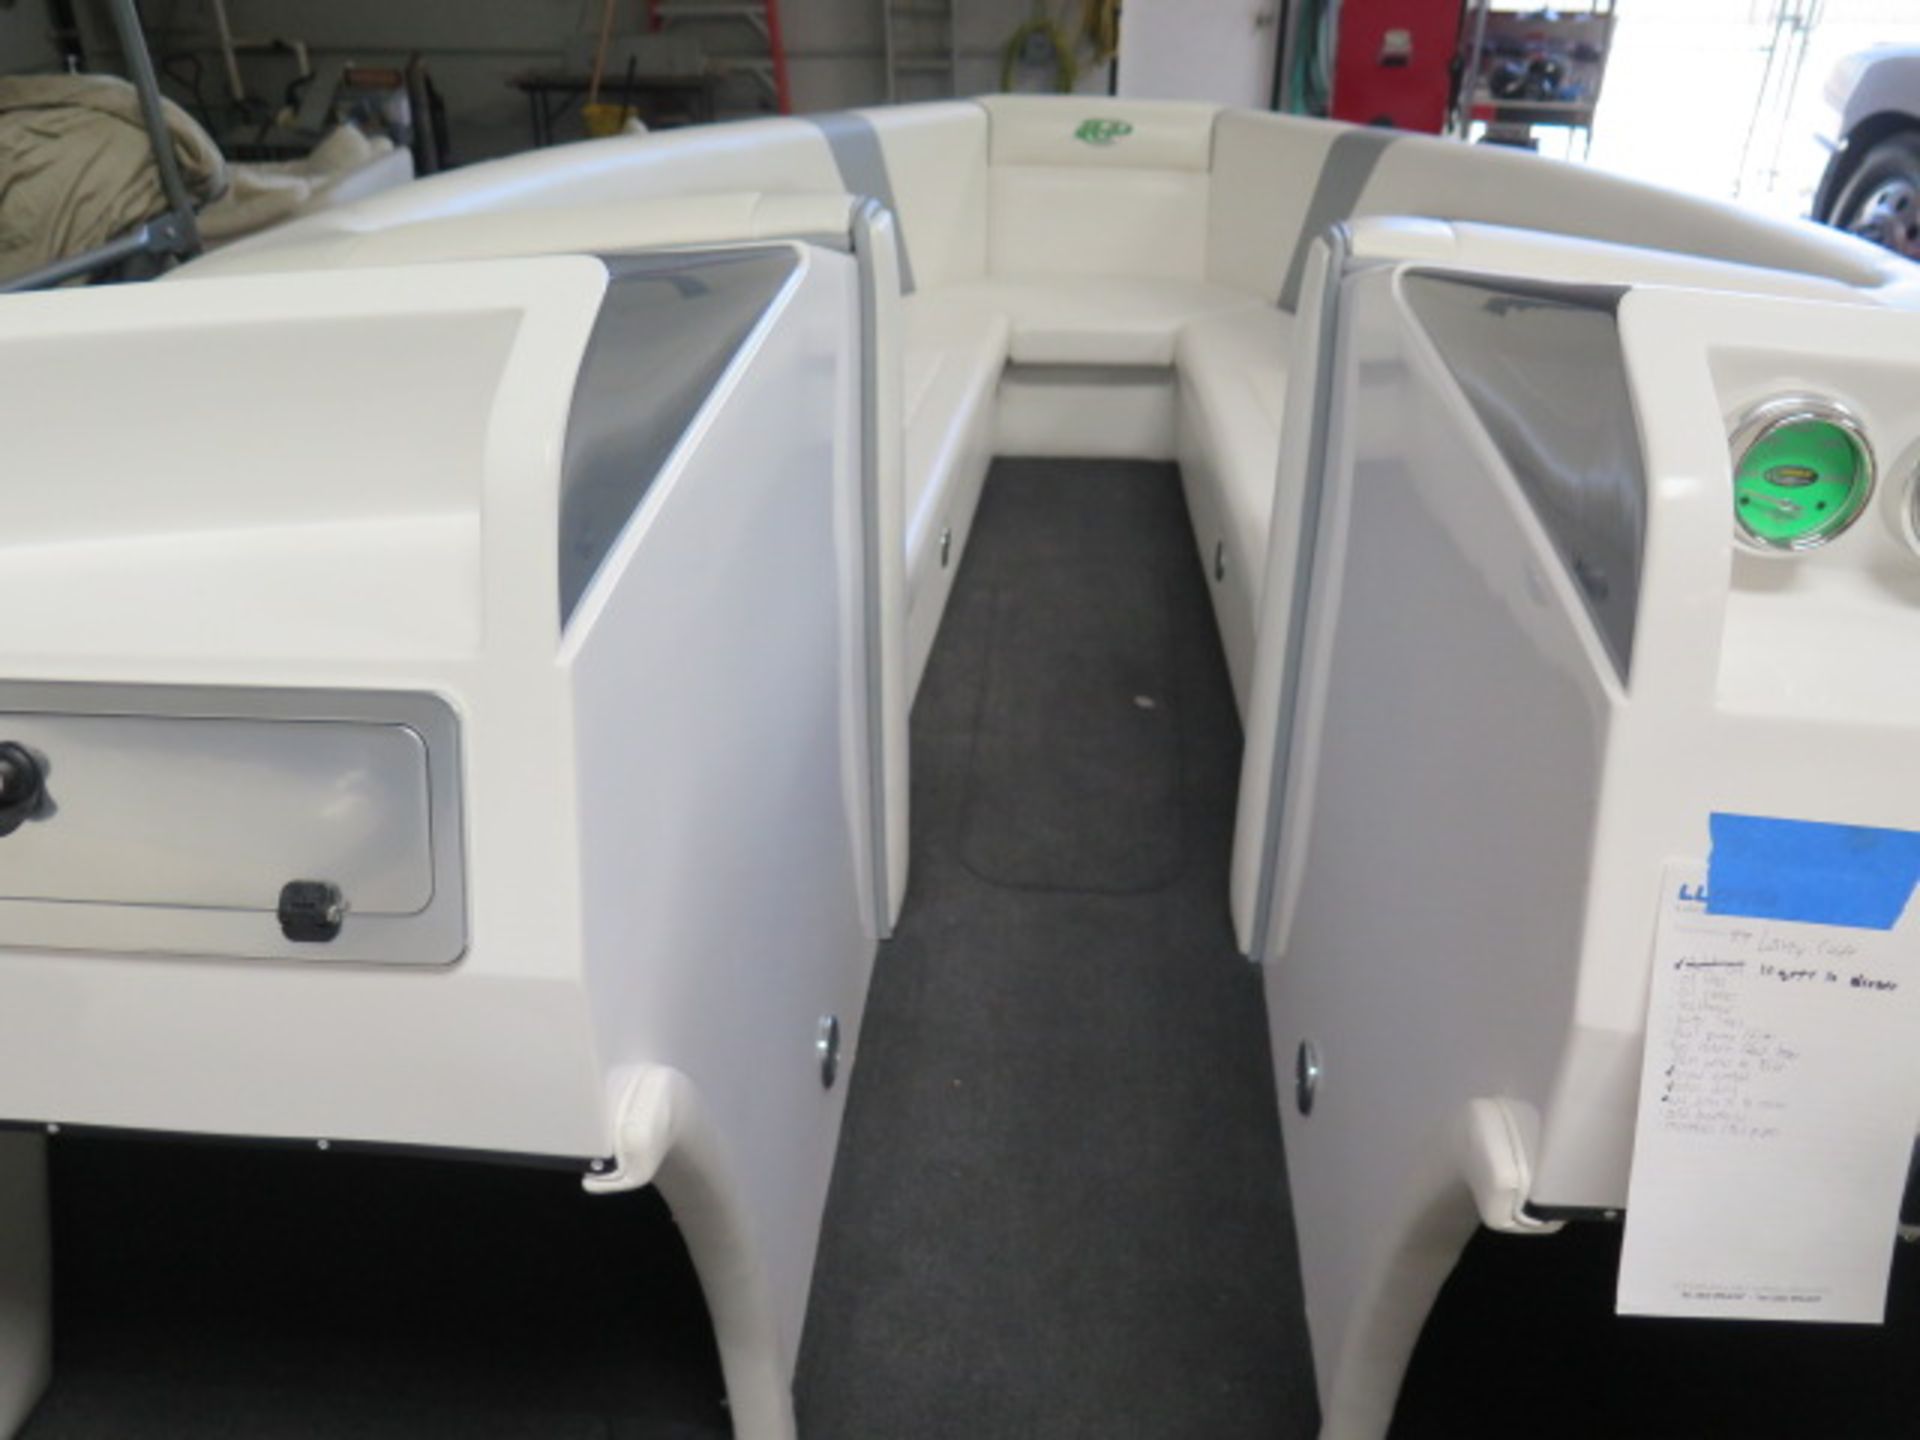 2020 Laveycraft 24' V-Bottom Open Bow Boat w/ Custon Martinez Interior, Boostpower 675Hp, SOLD AS IS - Image 30 of 40